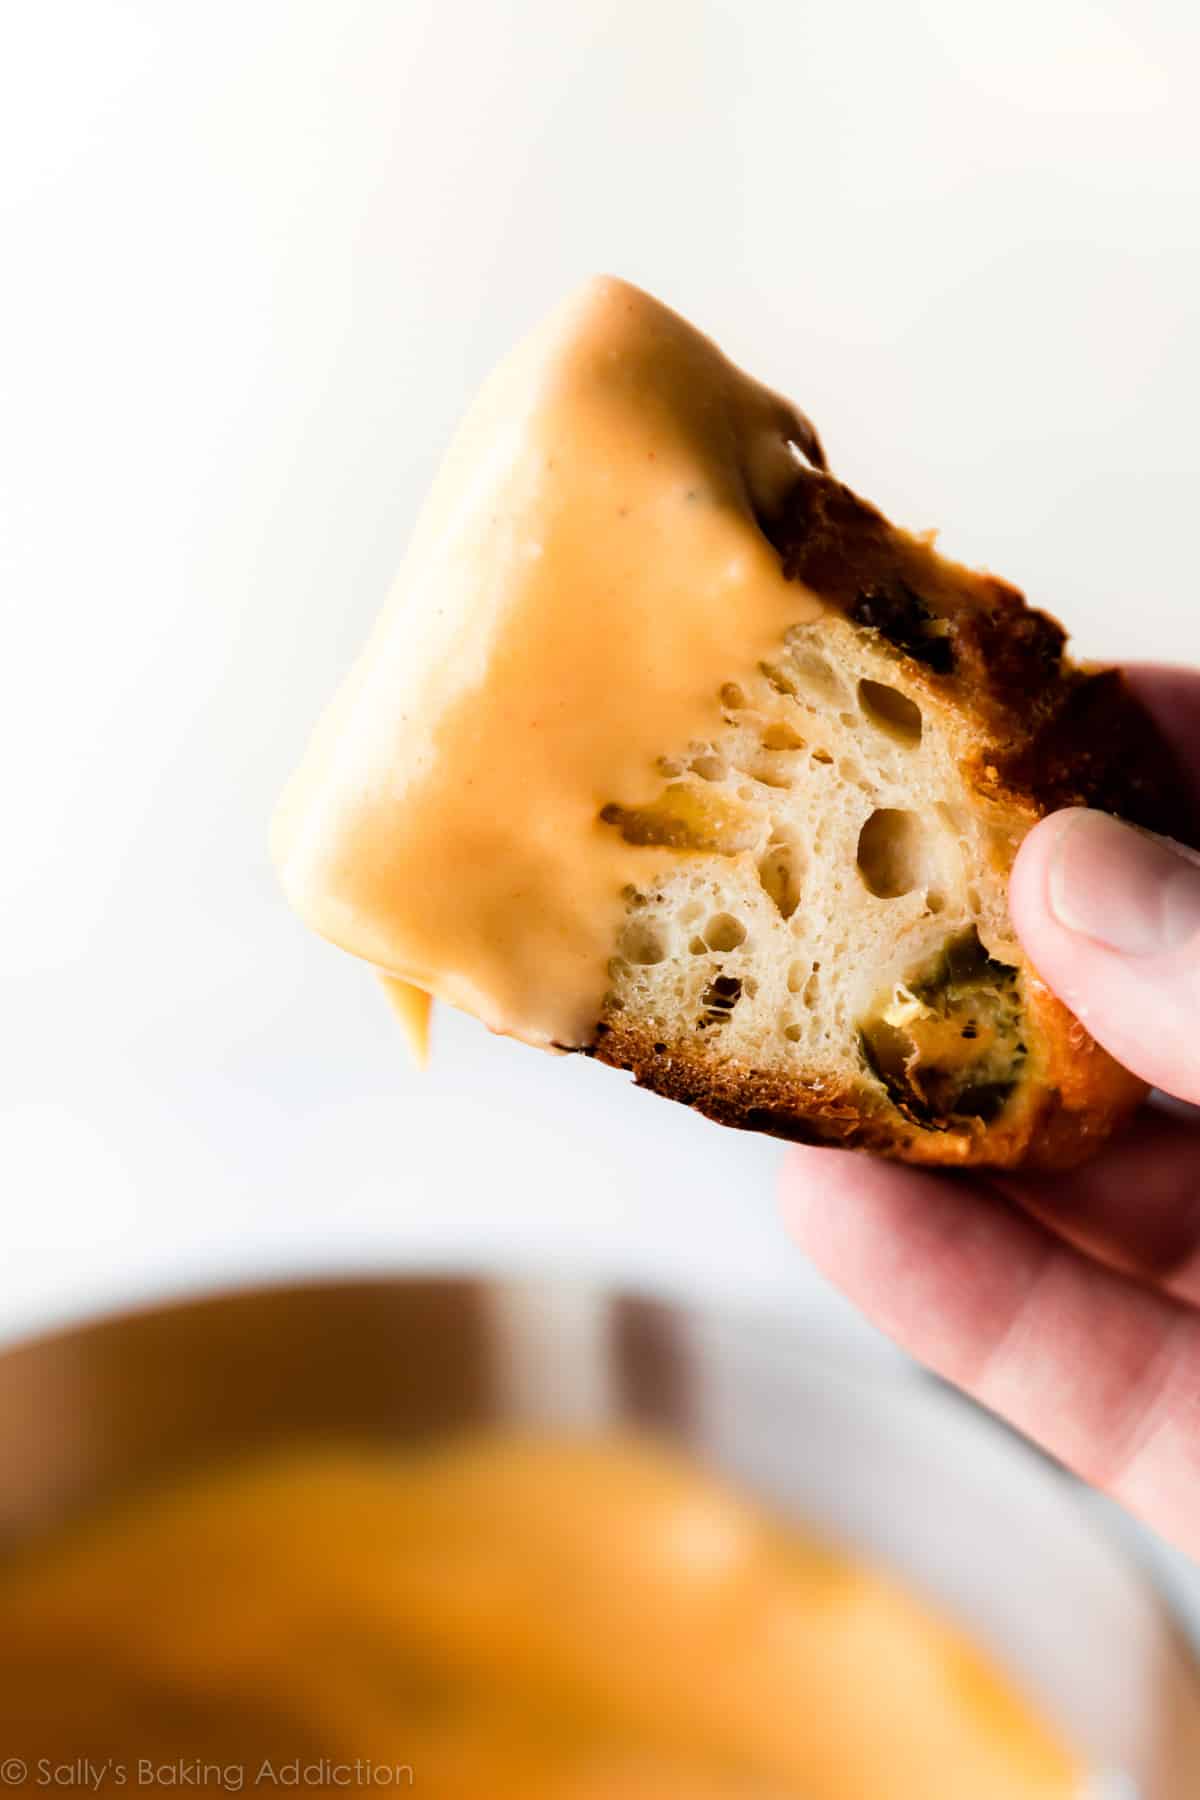 jalapeno cheddar bread dipped in homemade nacho cheese sauce